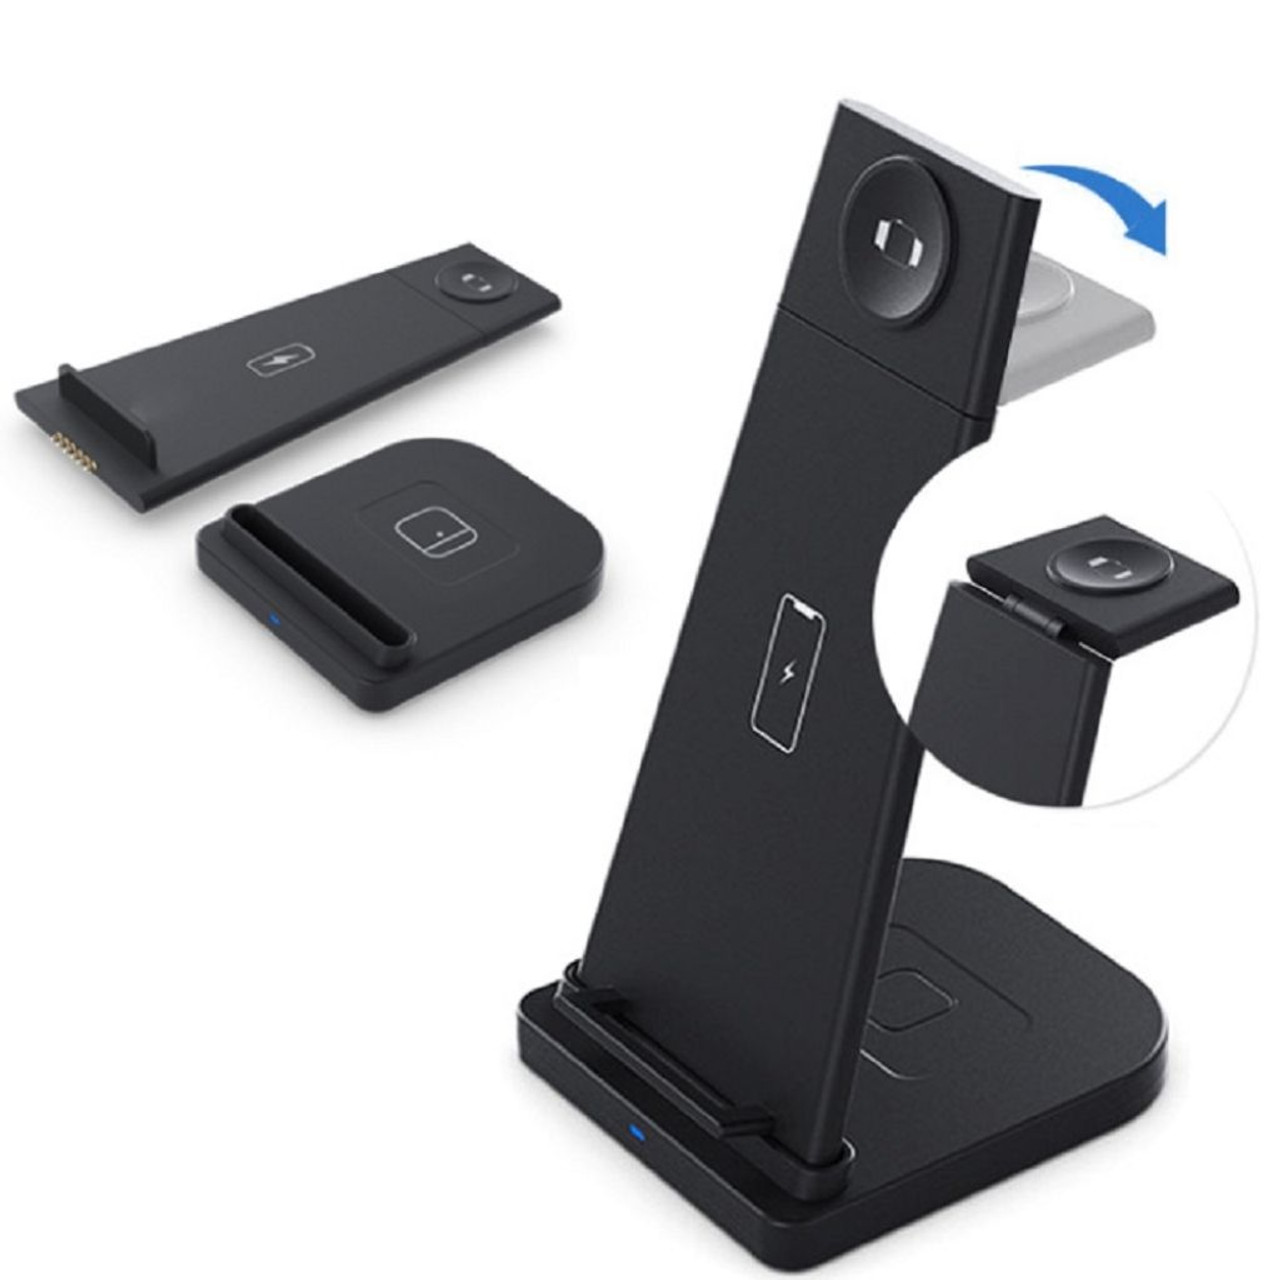 3-in-1 Fast Wireless Charging Stand for Phones, Apple Watch & AirPods product image